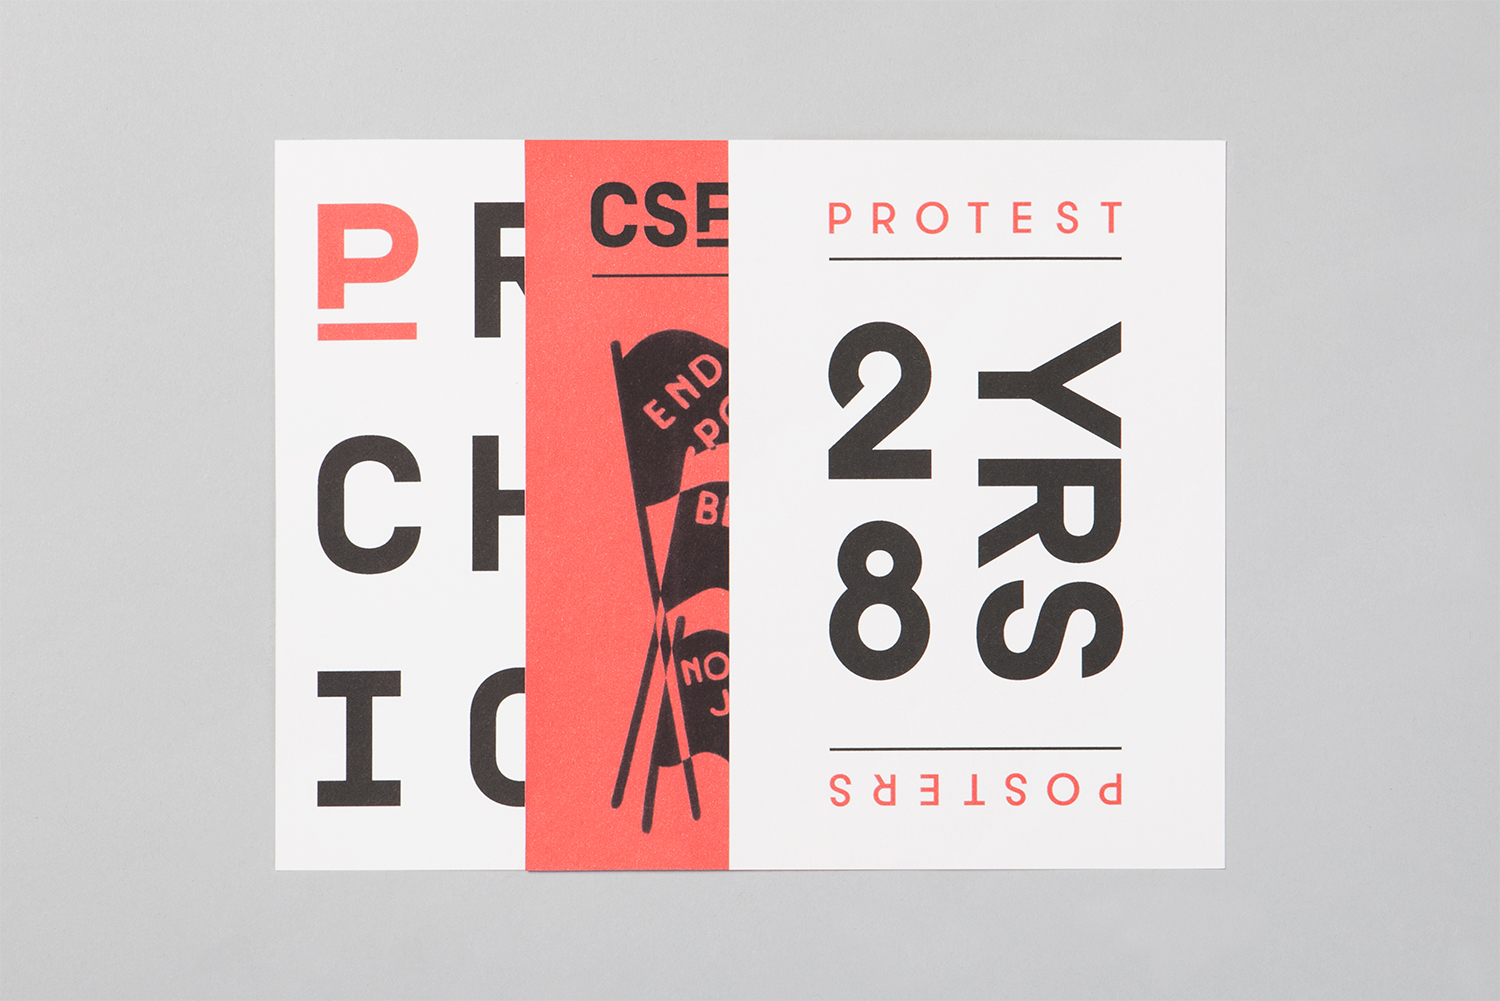 Visual identity and posters by Canadian studio Blok for The Center for the Study of Political Graphics